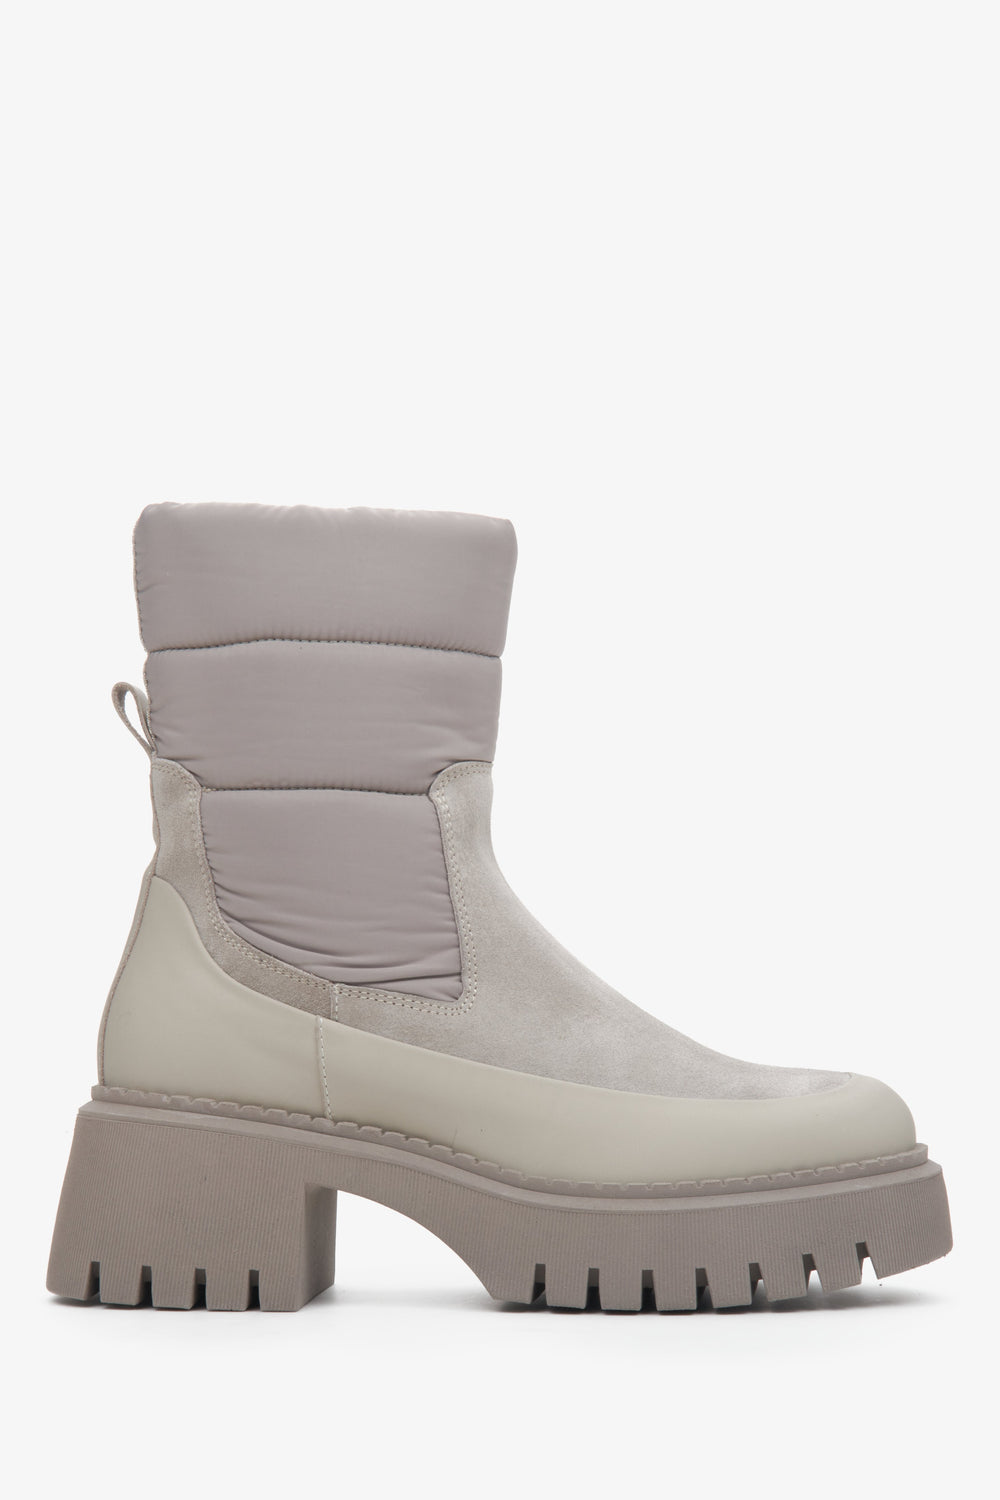 Women's Grey Winter Boots on a Stable Platform in Velour and Leather Estrо ER00113681.